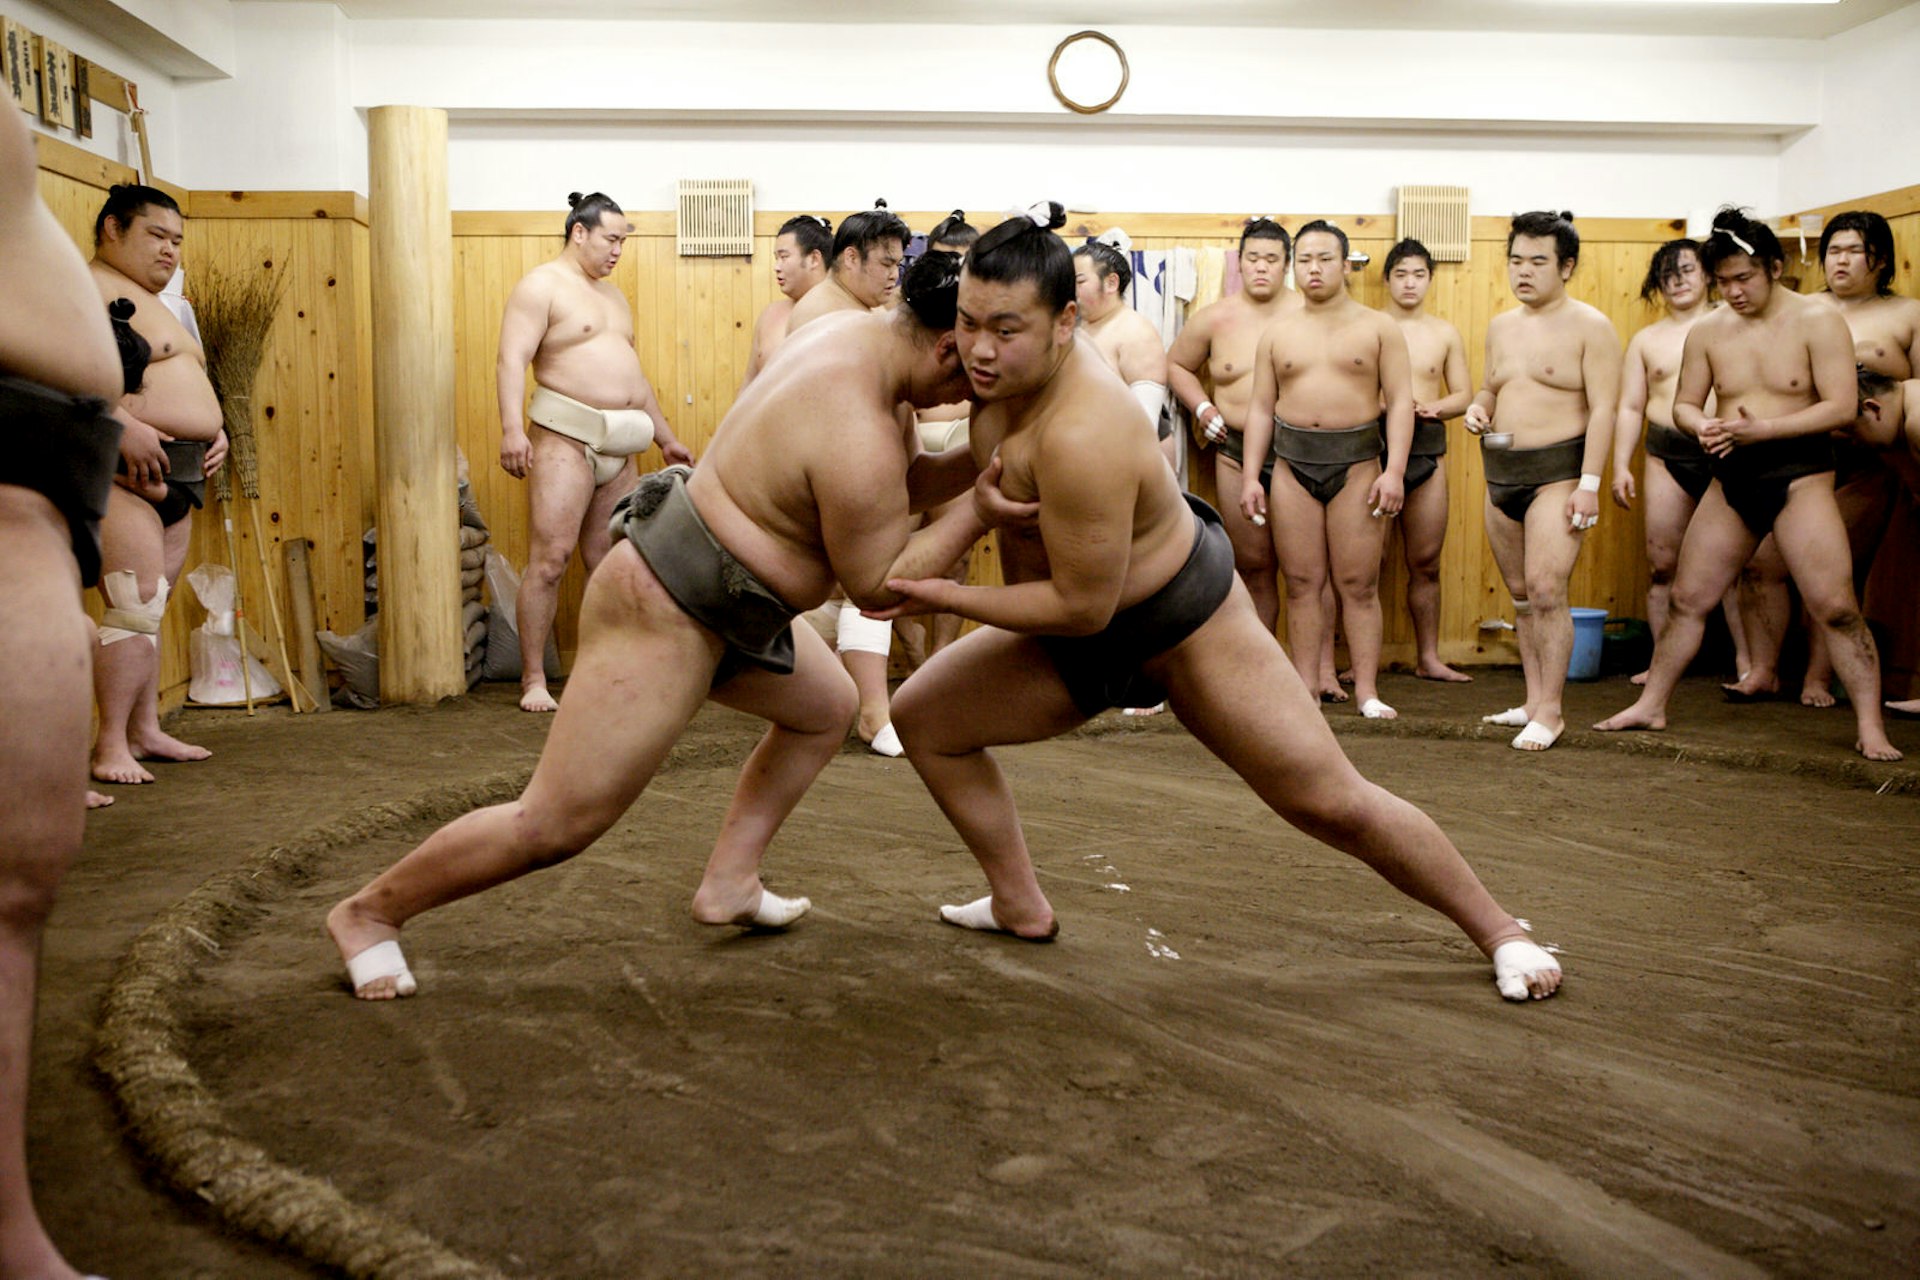 Young sumo wrestlers practice while other wrestlers look on in Tokyo